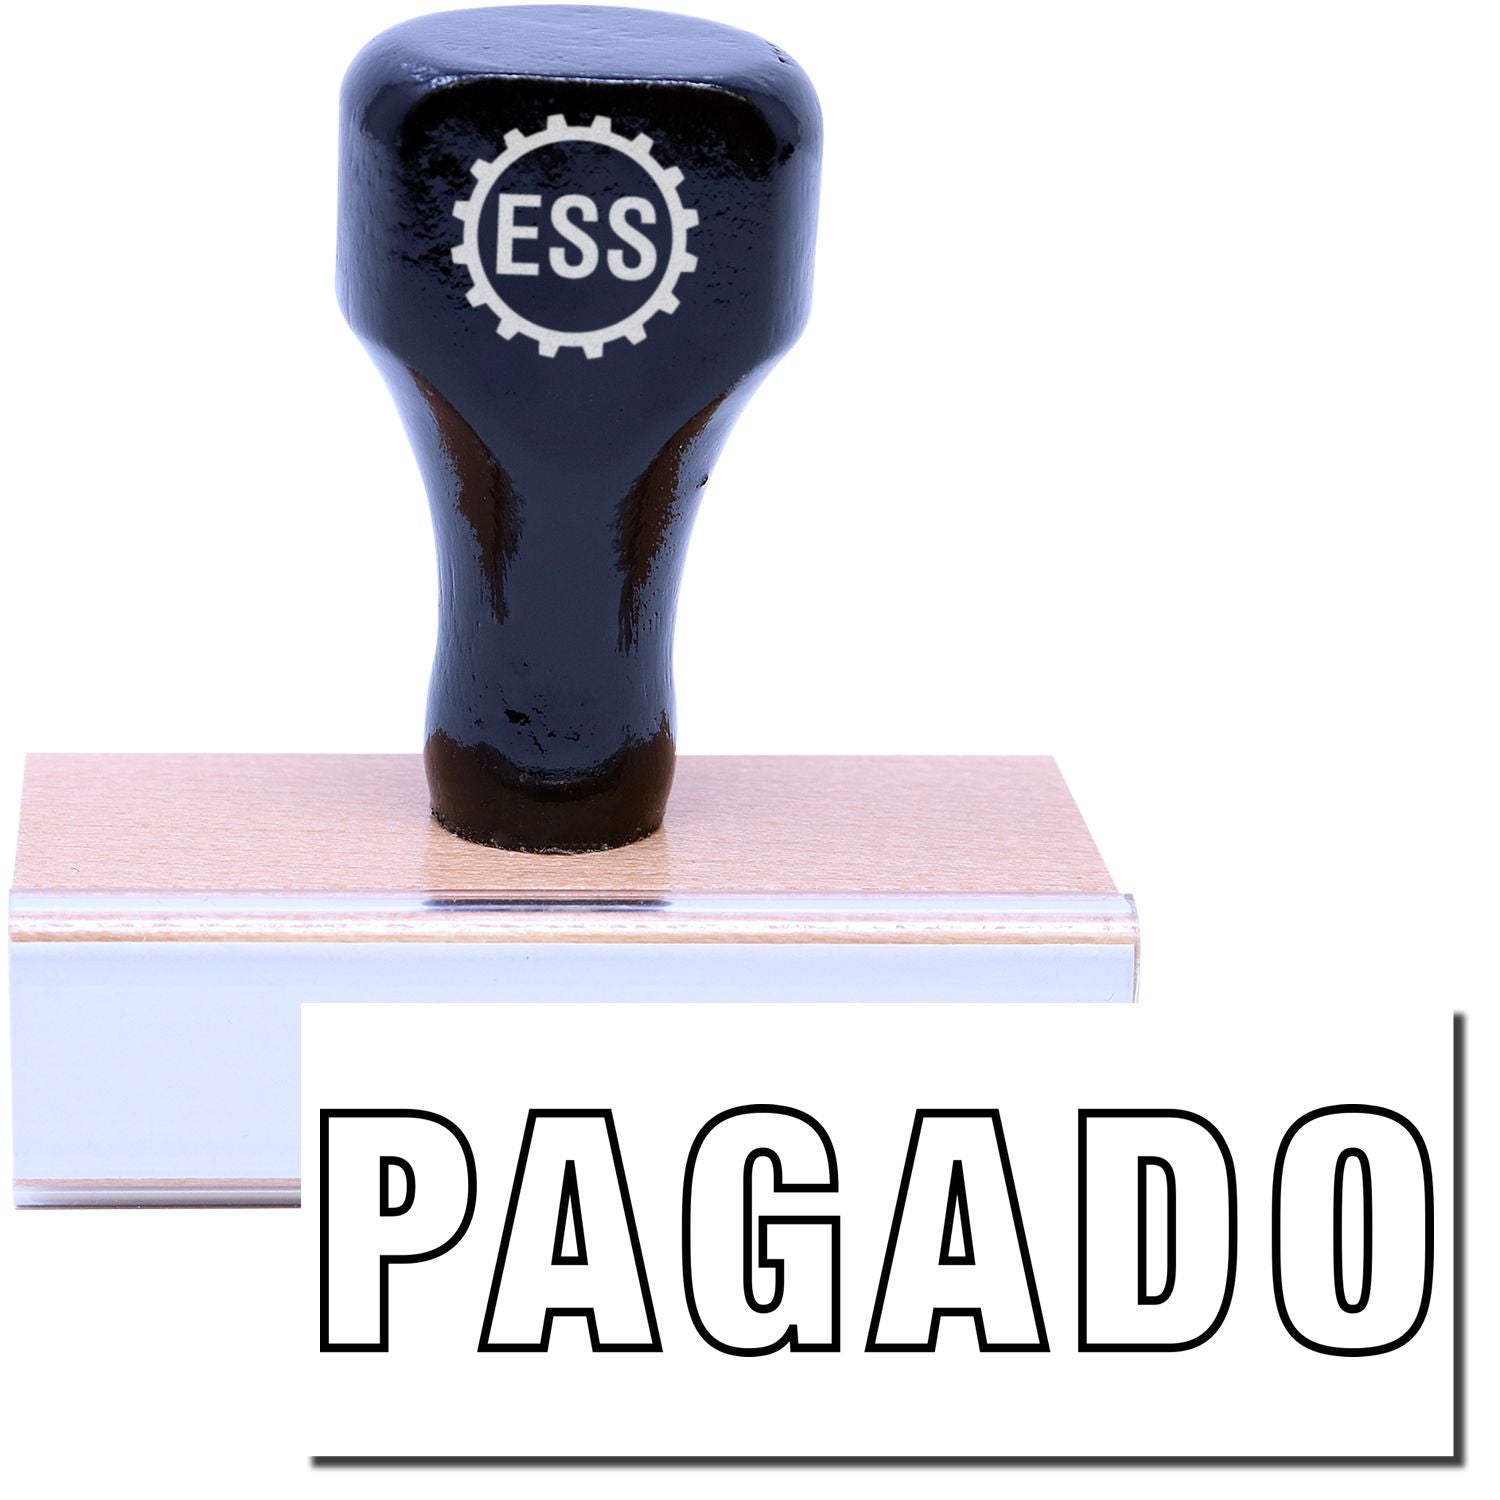 A stock office rubber stamp with a stamped image showing how the text "PAGADO" in a large outline font is displayed after stamping.